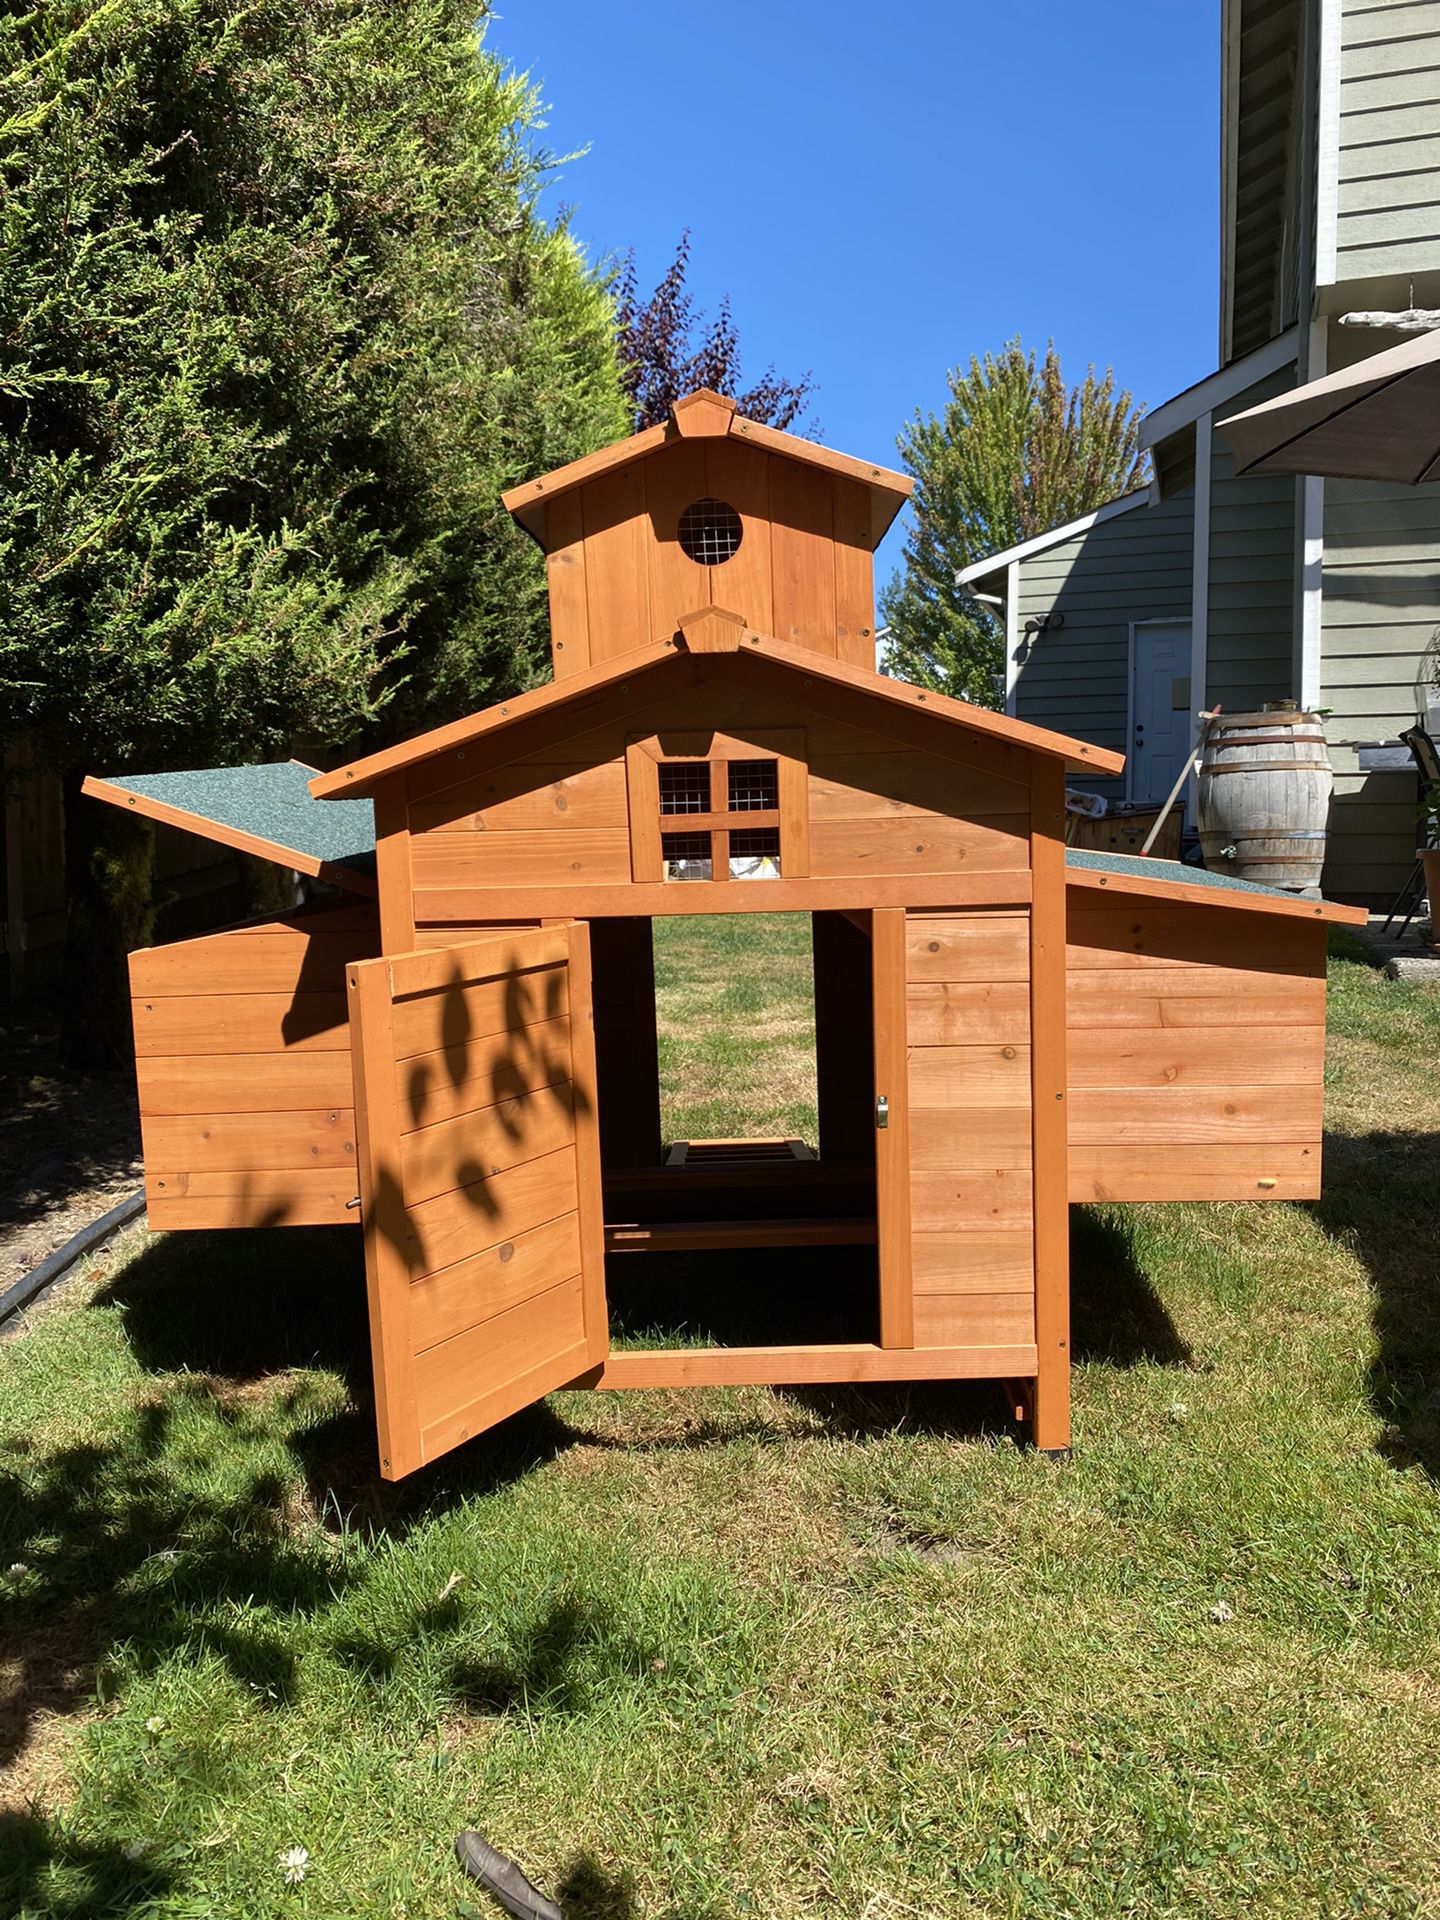 Coop - chickens or bunnies. New condition never used. Lake Stevens.